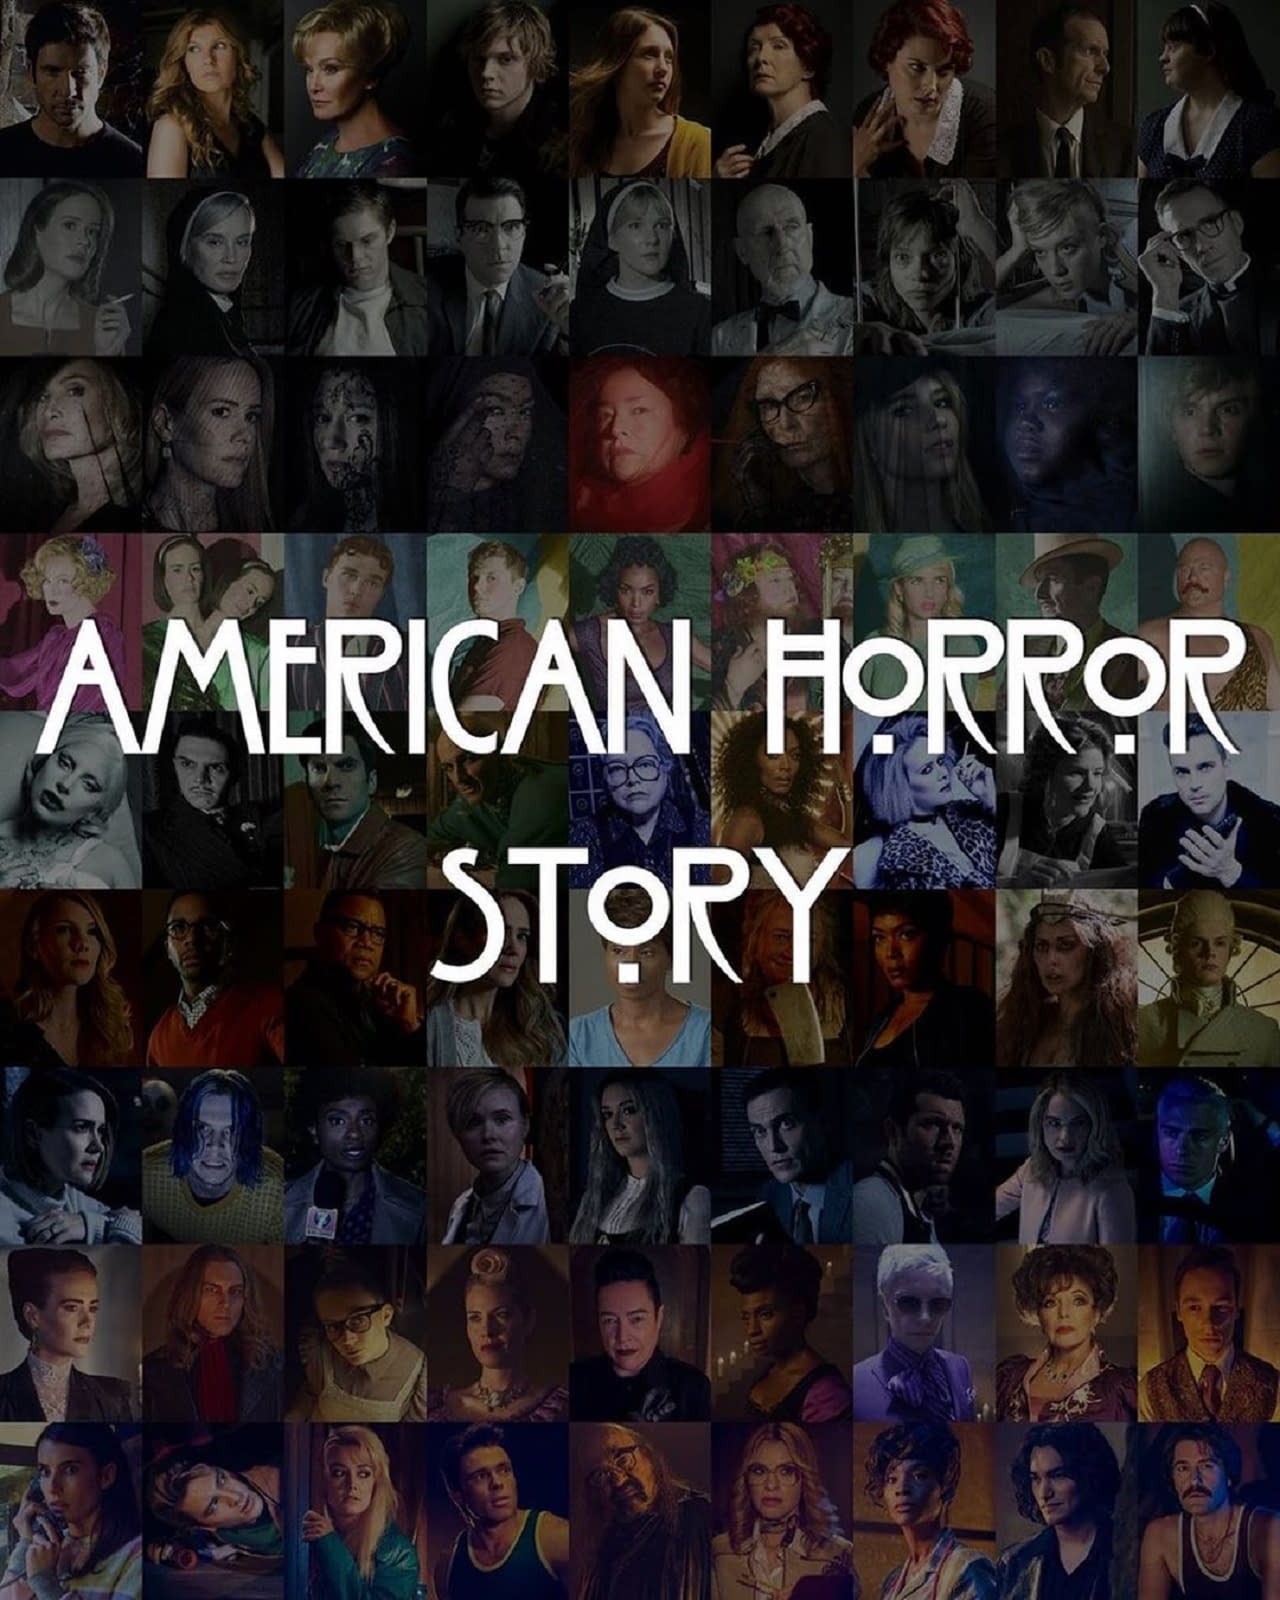 American Horror Story Seasons Ranked: From Murder House to 1984